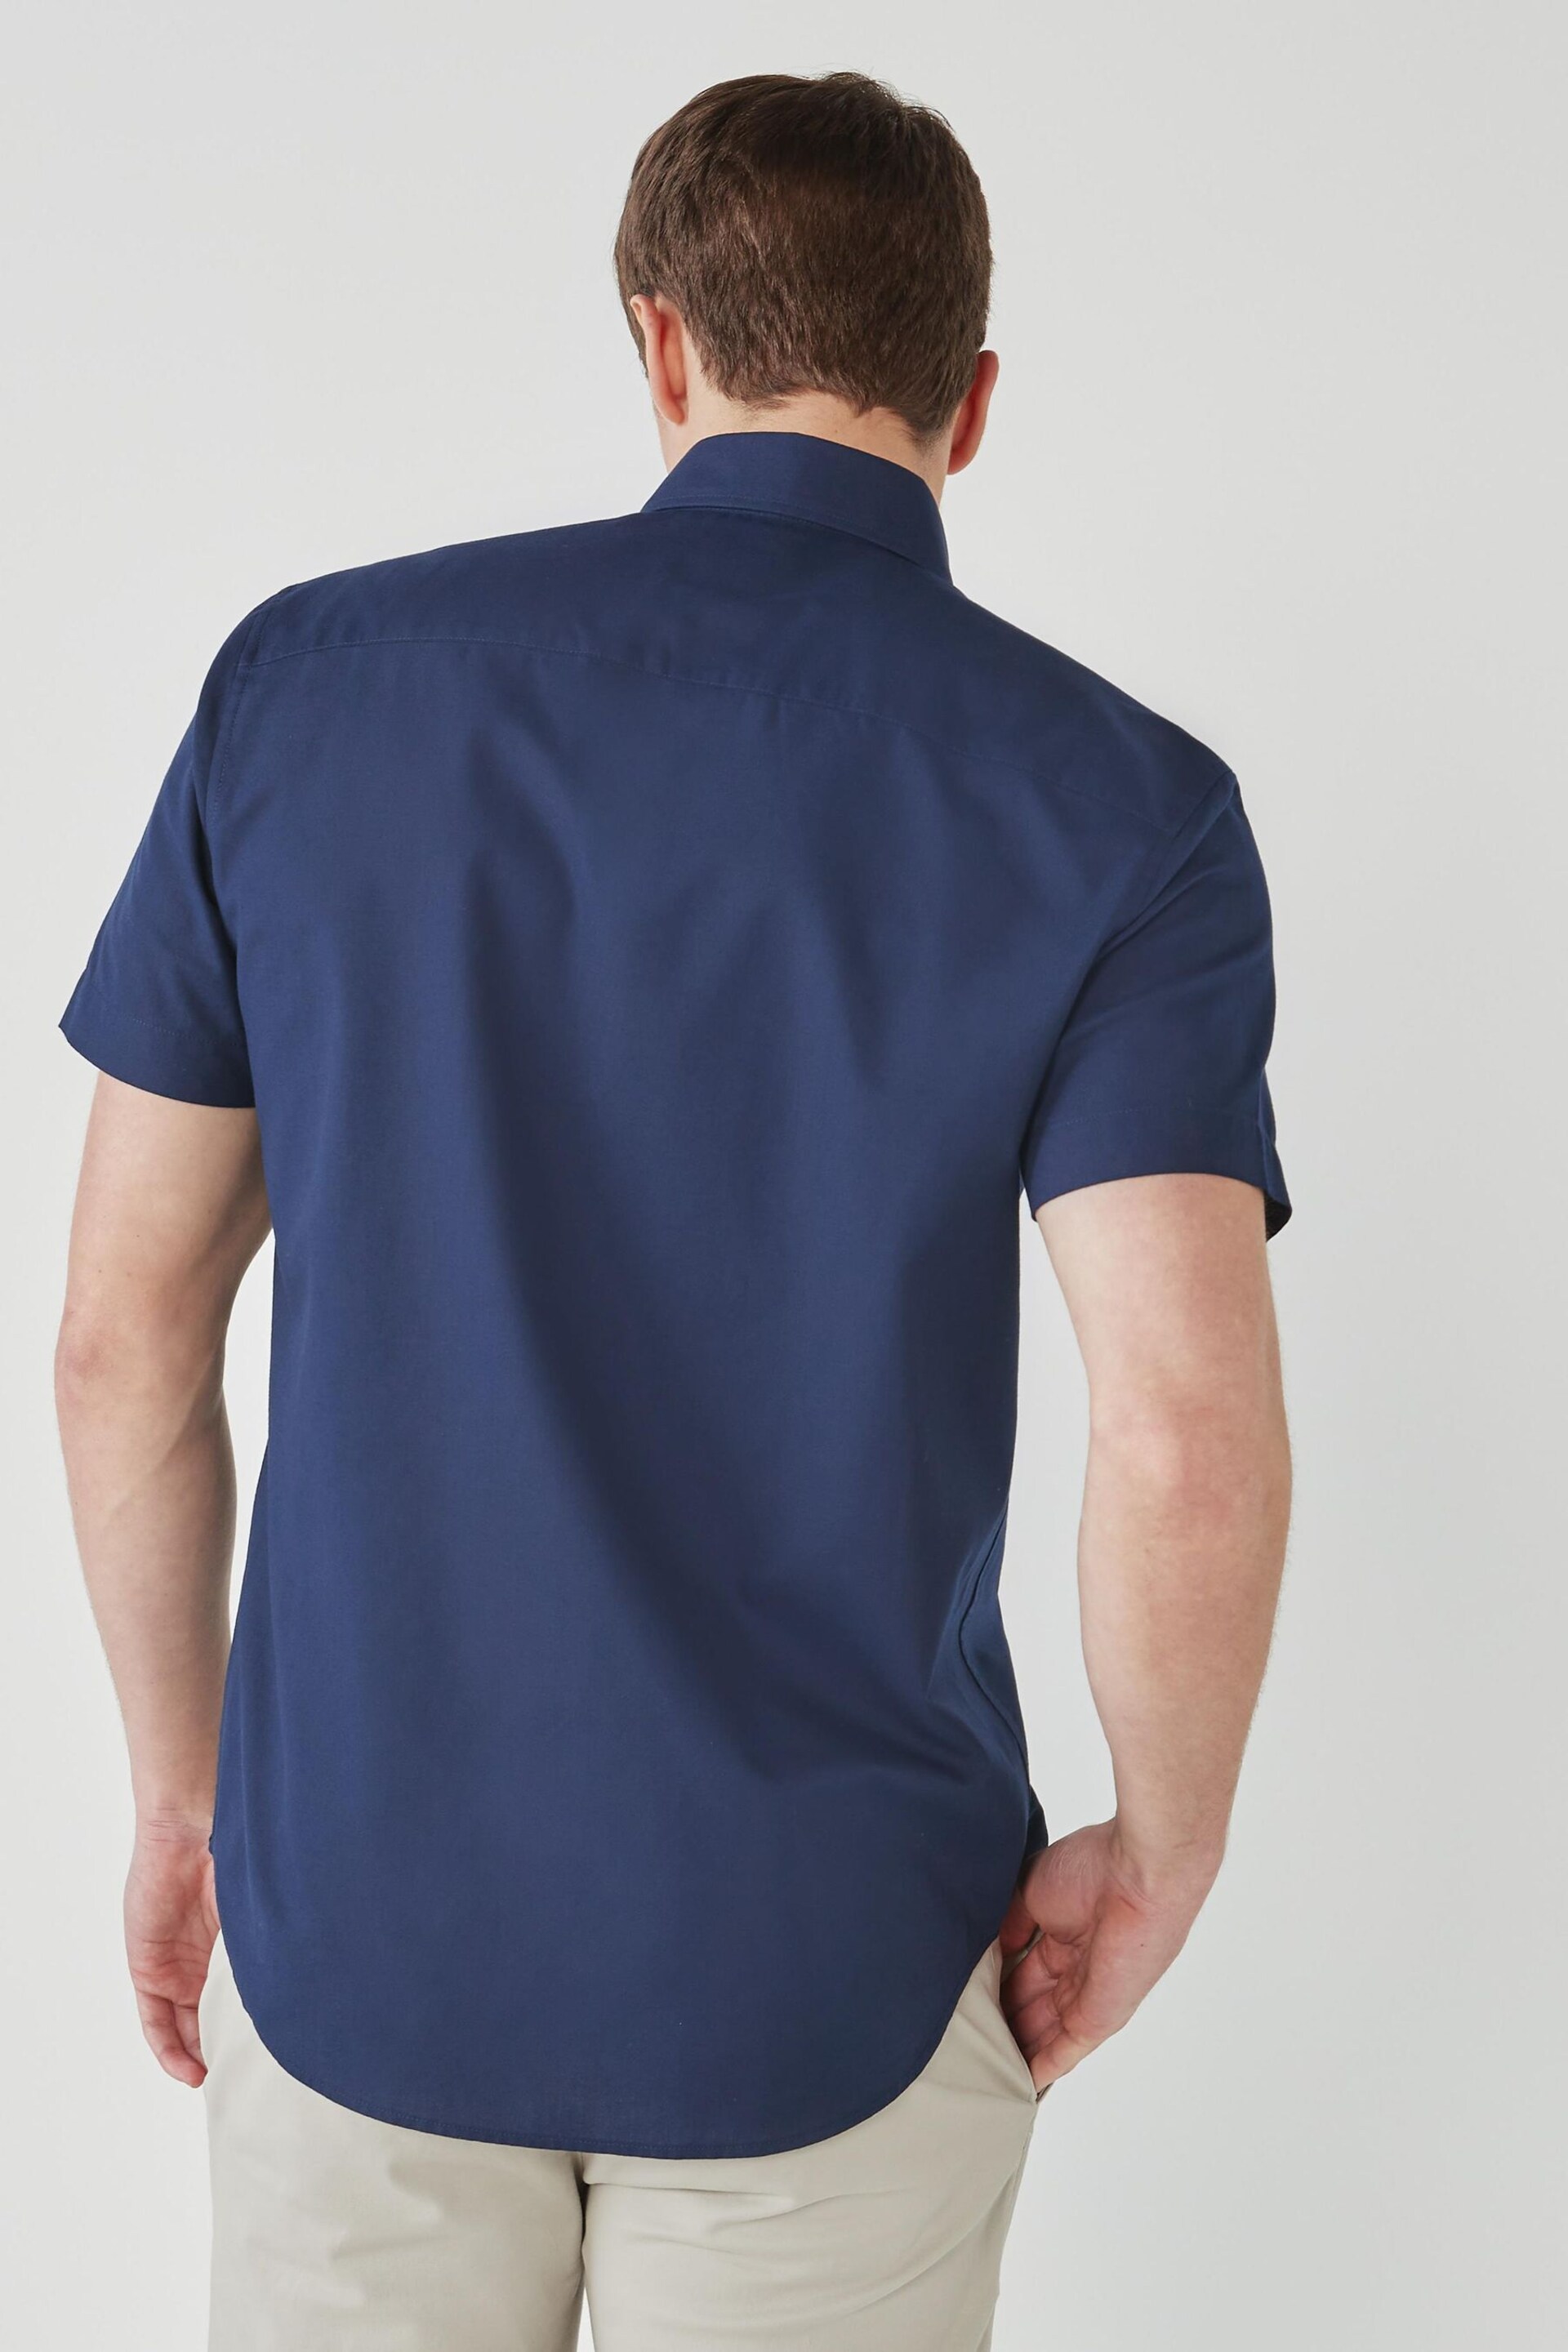 Navy Blue Easy Iron Button Down Short Sleeve Oxford Shirt - Image 2 of 7